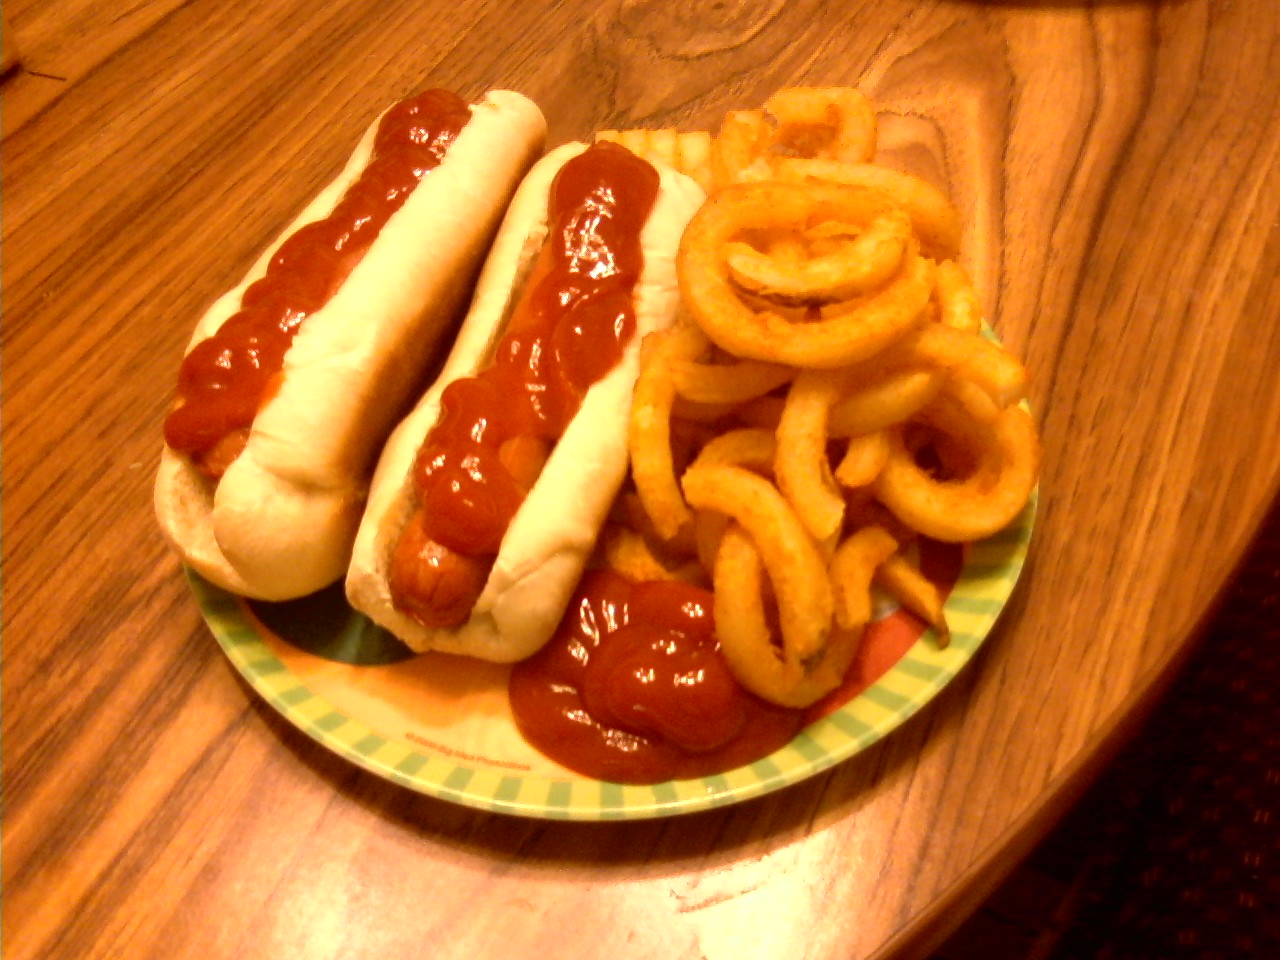 Here is the Little One's plate; she prefers her hot dogs and fries with lots